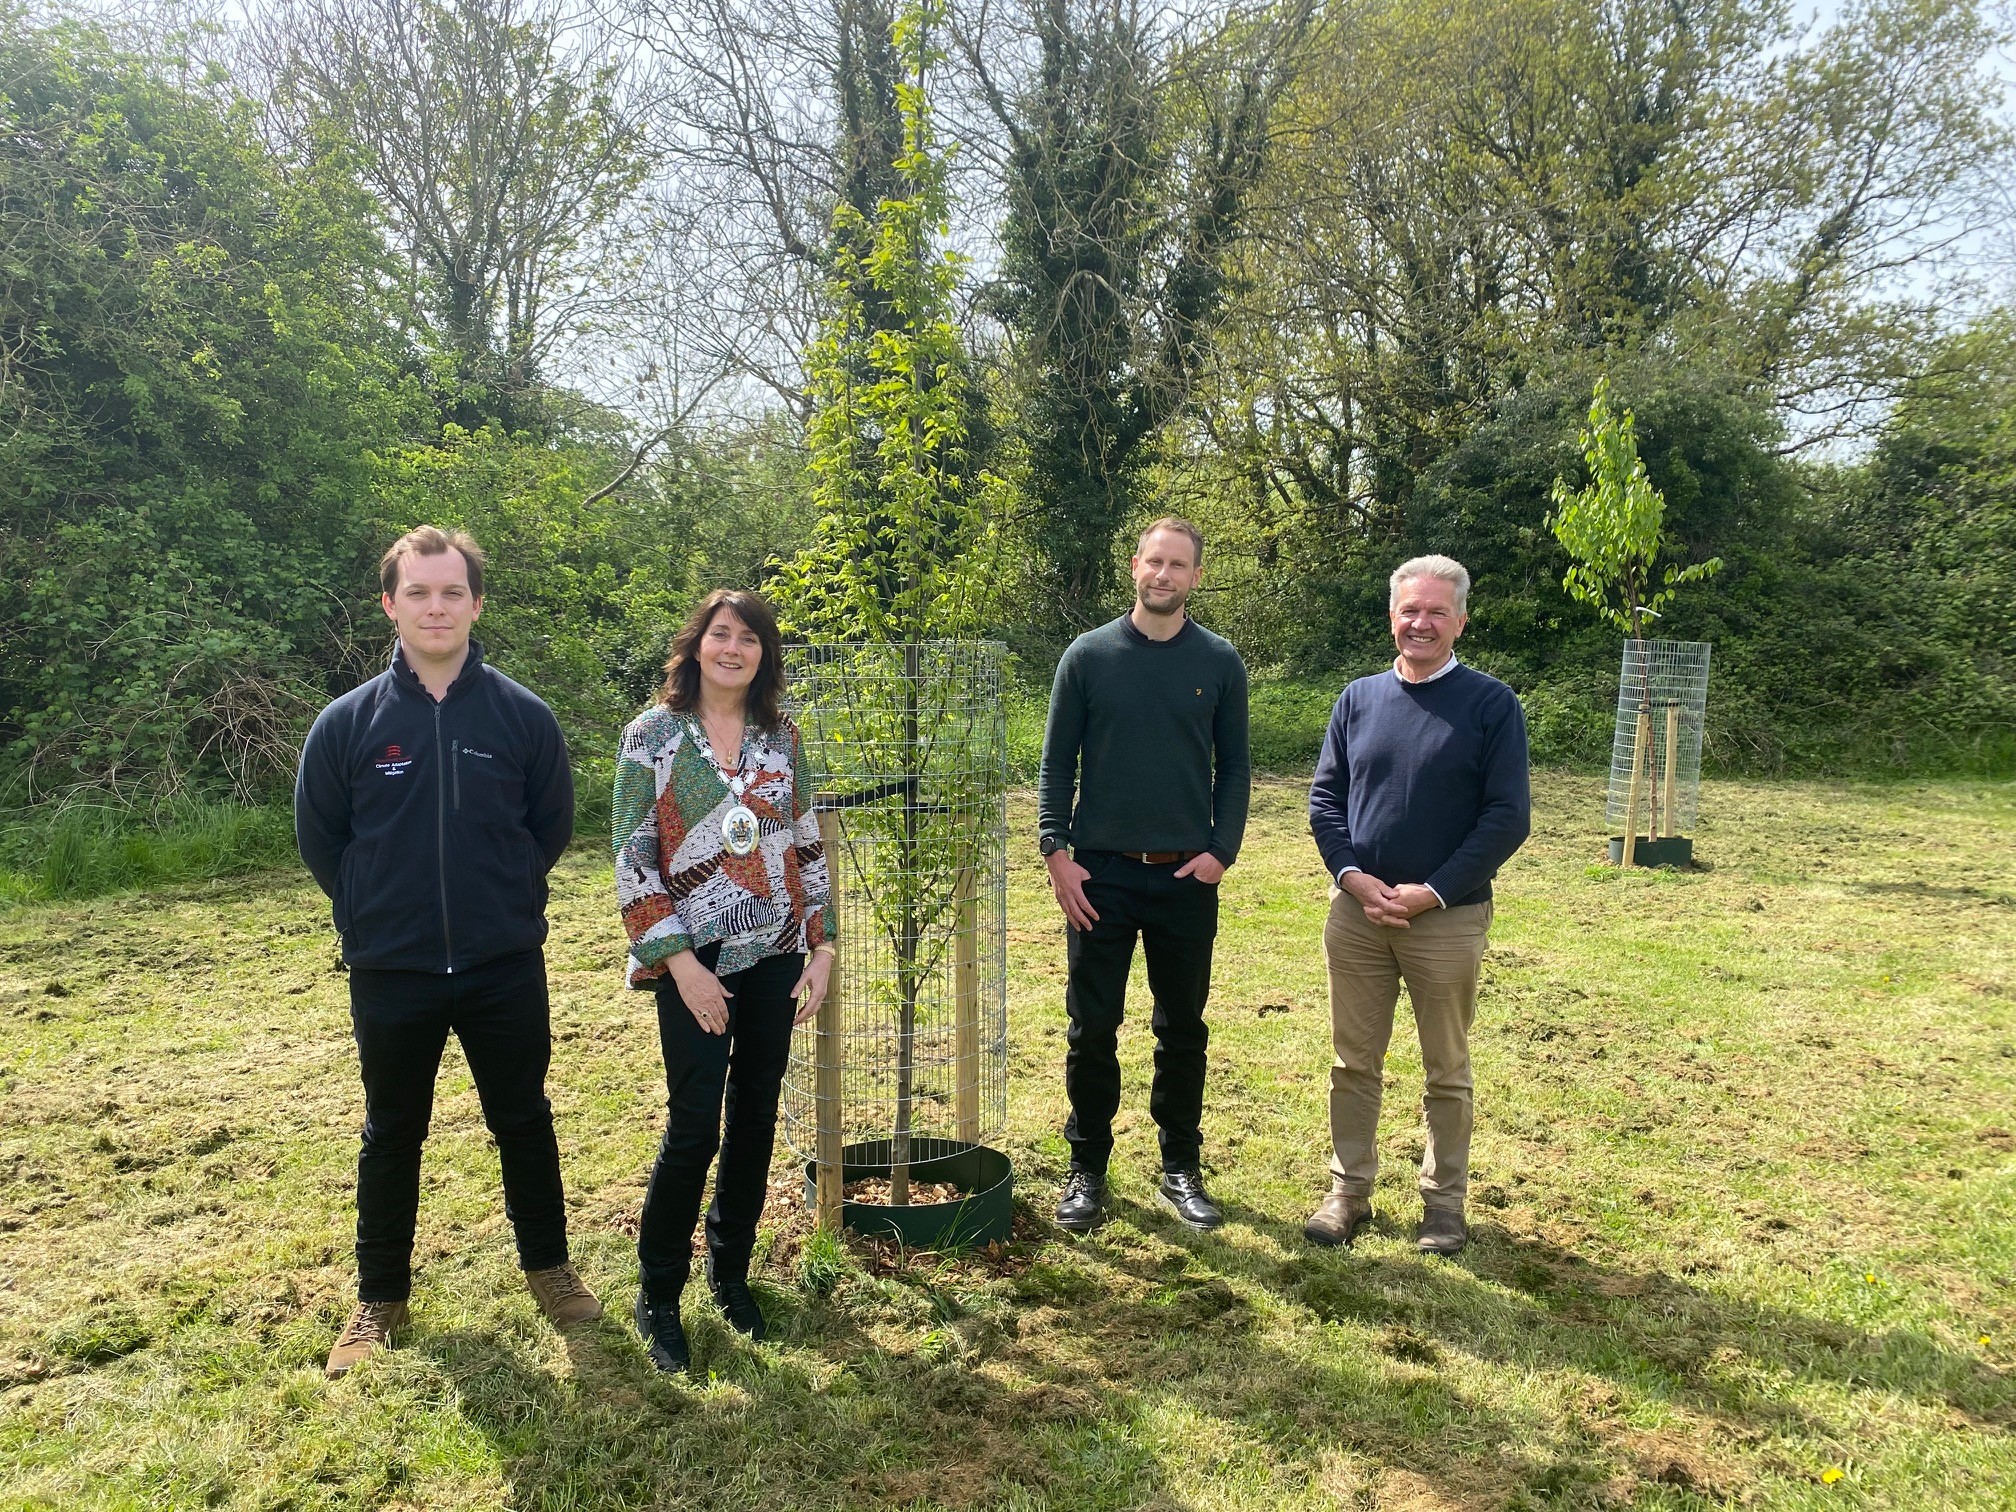 Councillors Diana Garrod and Peter Schwier are joined by Braintree District Council officer Andrew Digby and Essex County Council officer George Bartley in front of newly planted trees at Bradford Meadows green space in Braintree.